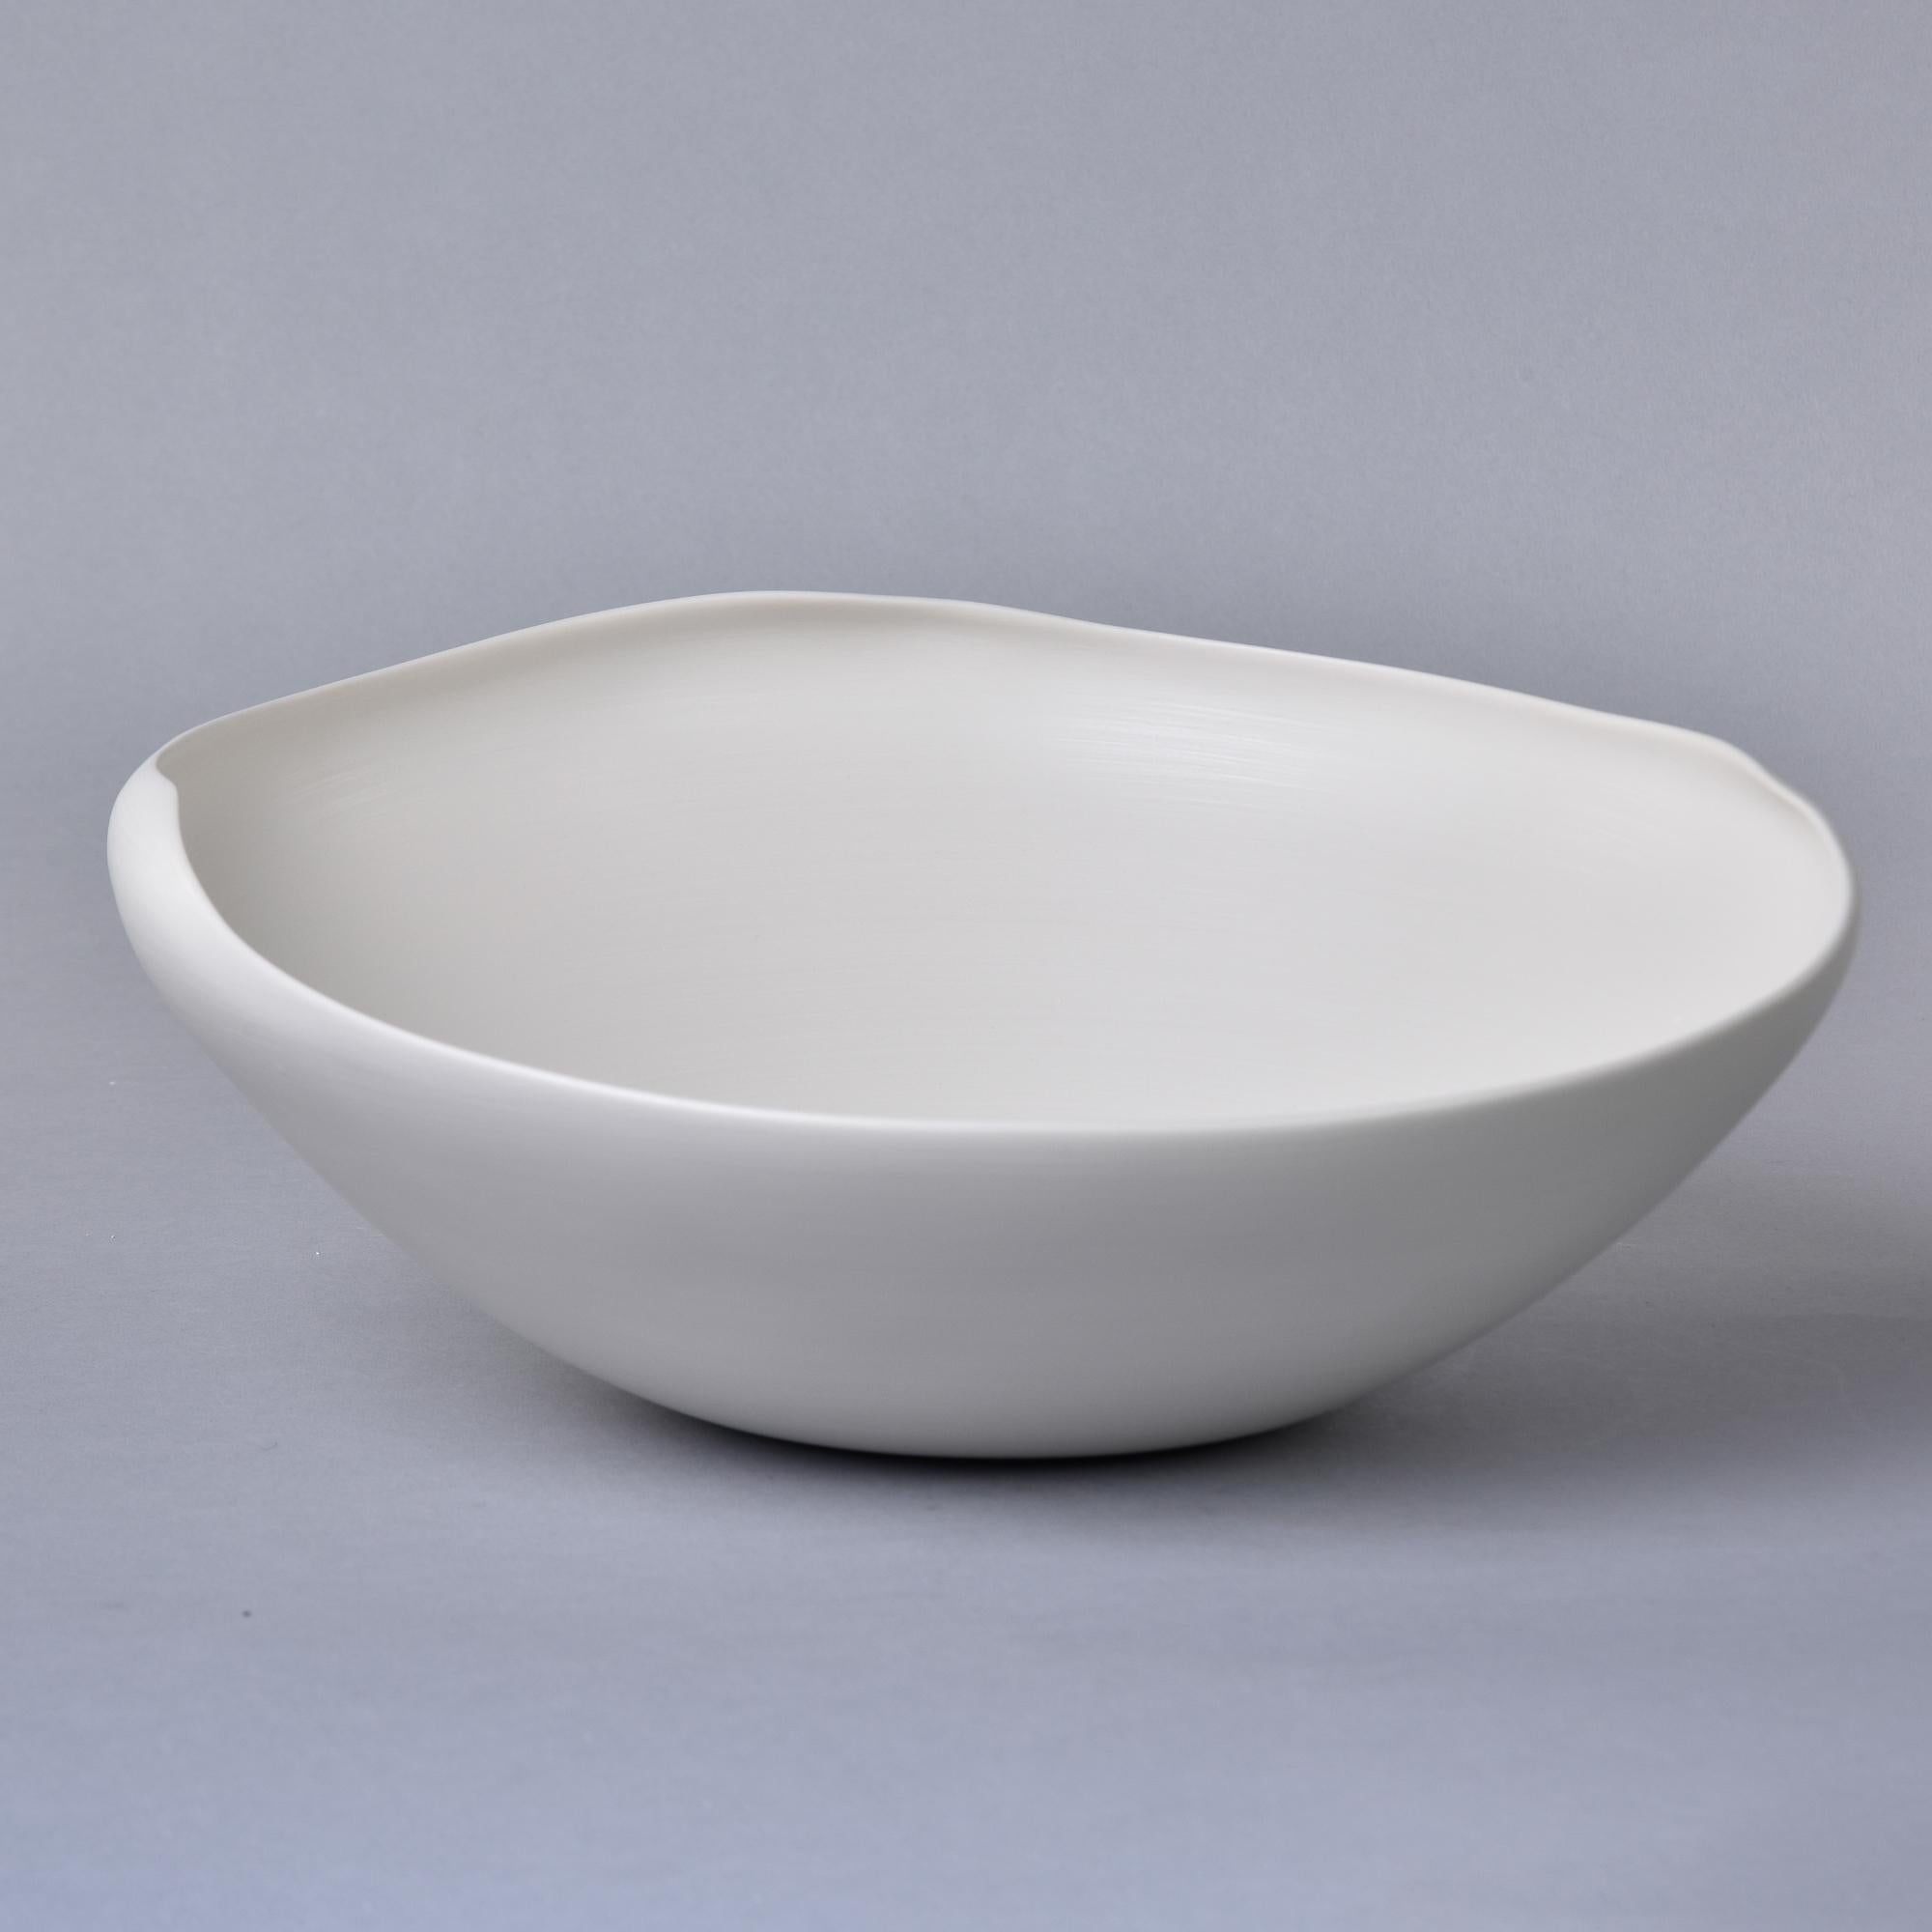 New and imported from Italy, this art pottery bowl by Rina Menardi is a thin-walled bowl with an irregular rim and neutral bone white glaze. Underside of base has maker’s mark. New with no flaws found. Other styles, colors and sizes by this maker